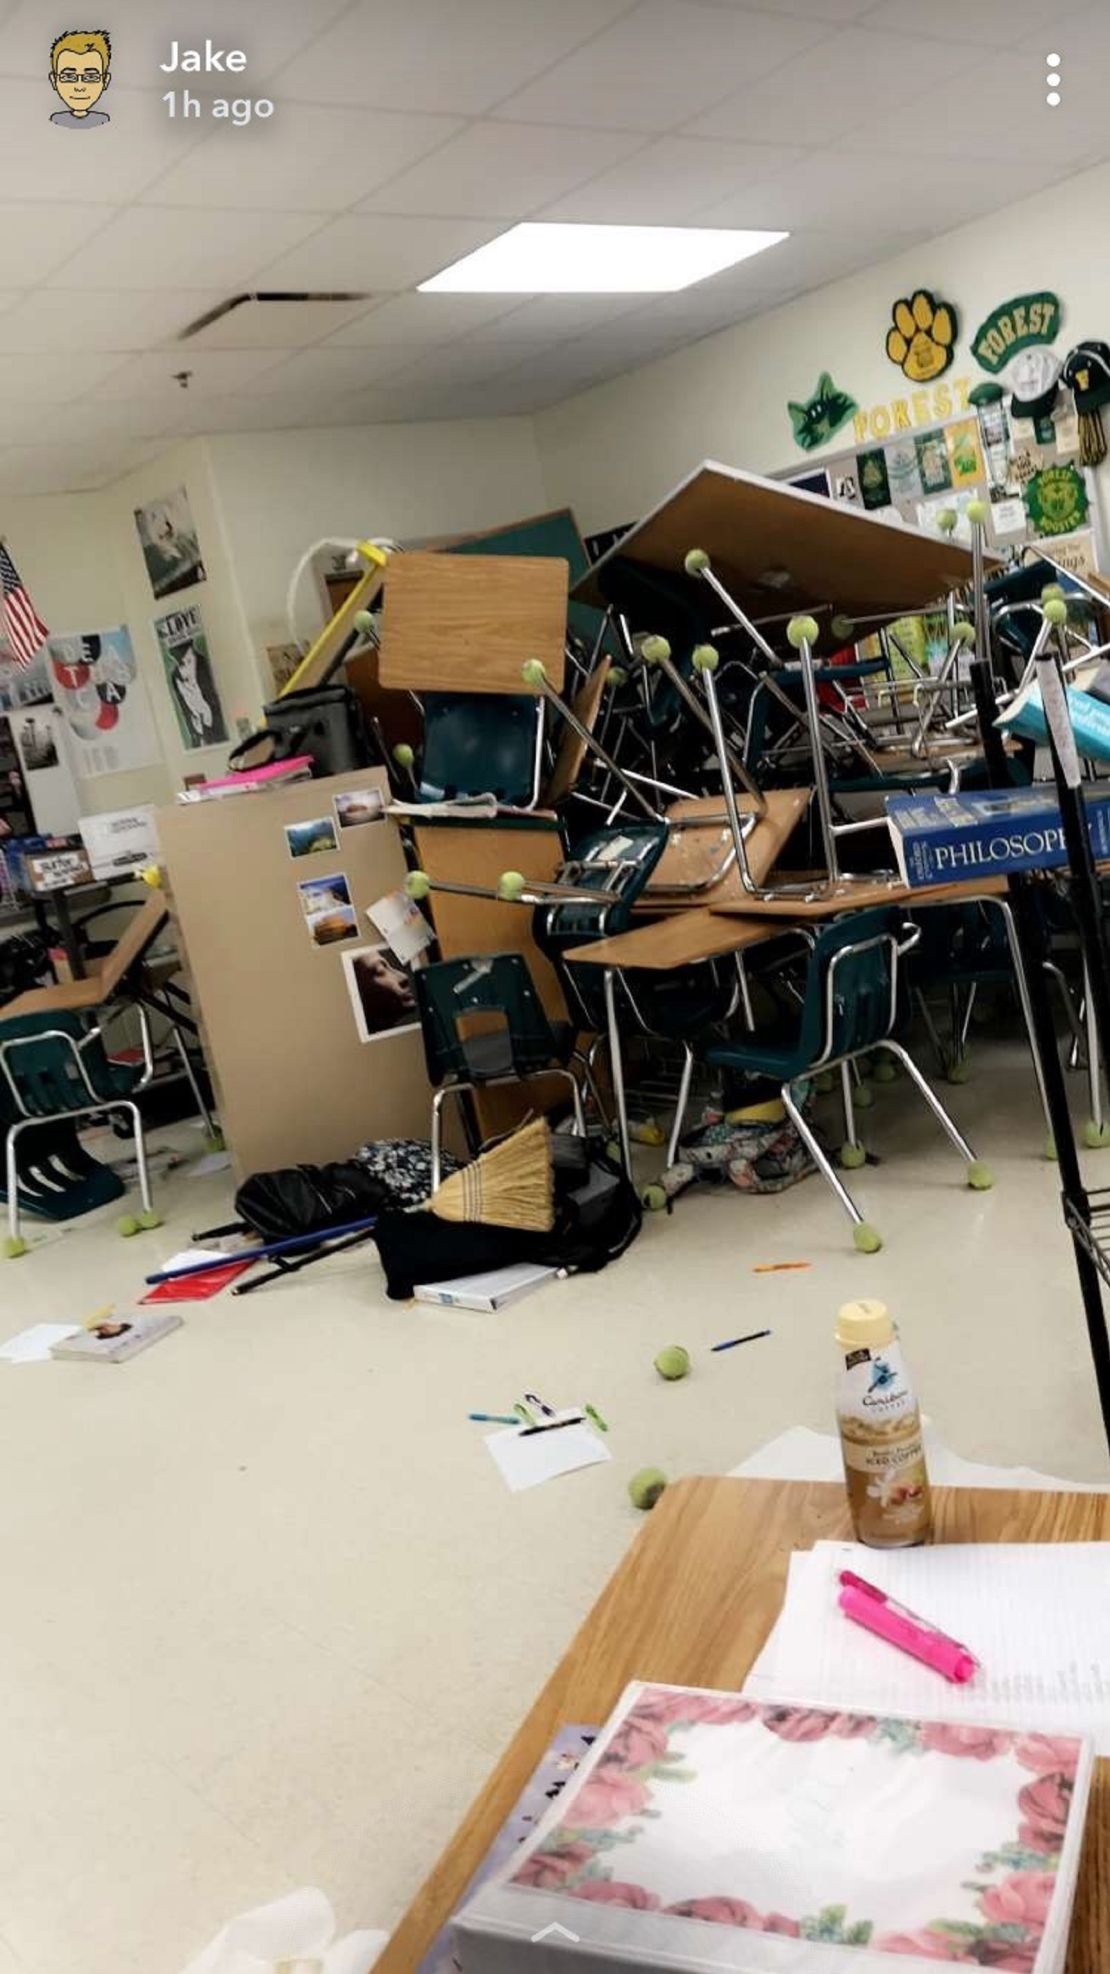 Students at the Ocala, Florida, school used desks, chairs and file cabinets to barricade themselves.